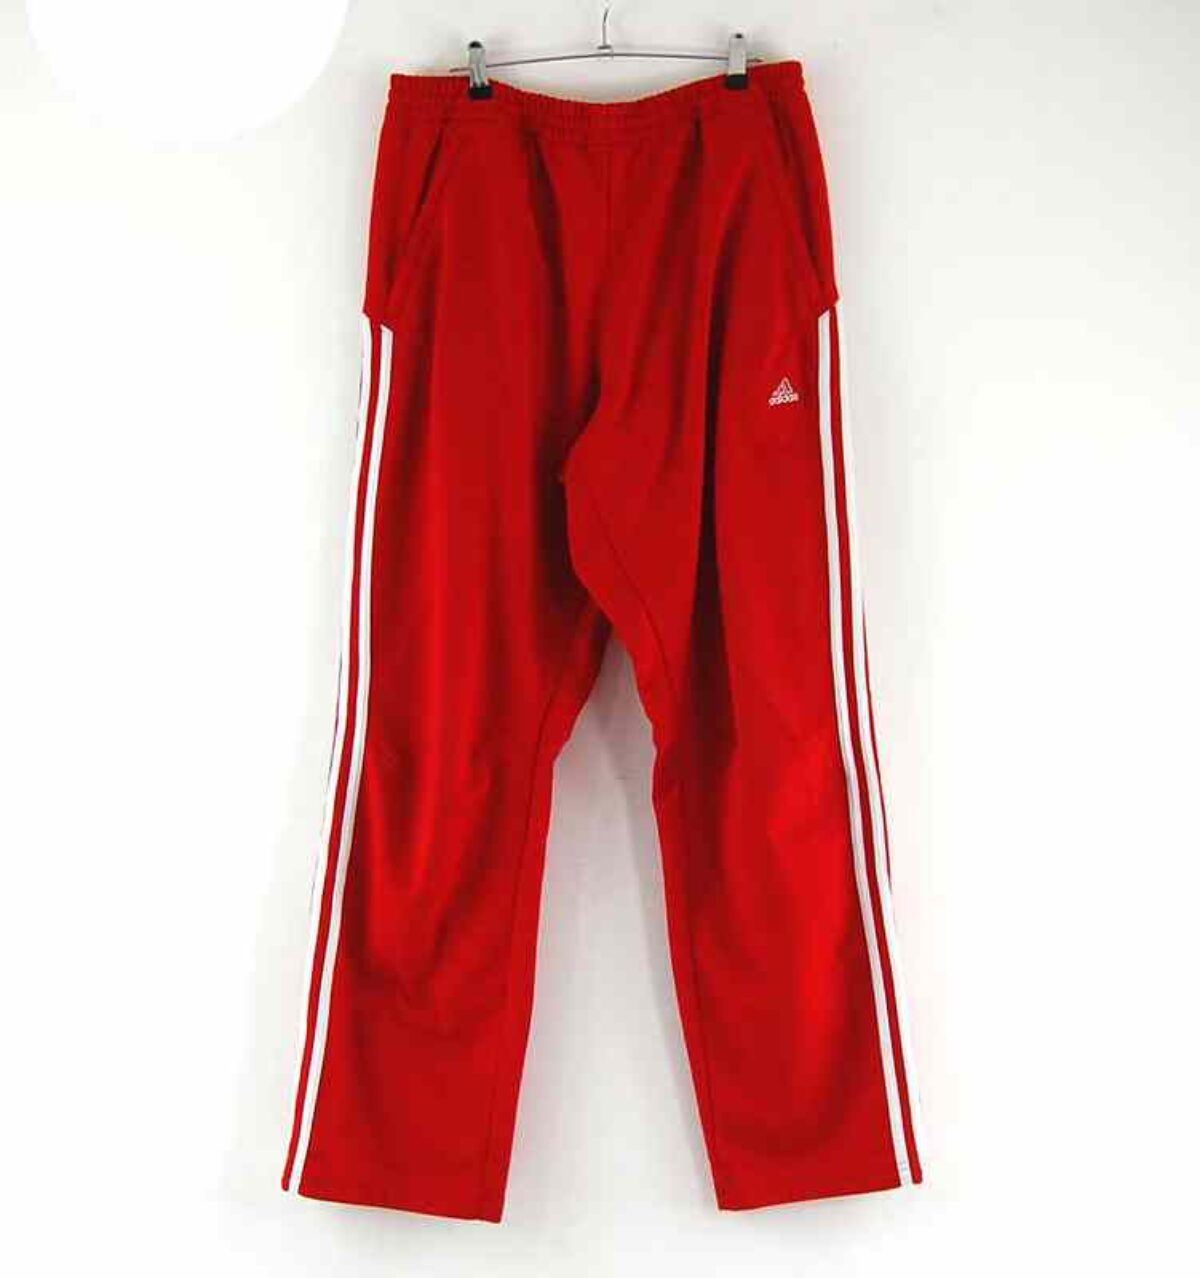 https://www.blue17.co.uk/wp-content/uploads/2021/02/Red-Adidas-Tracksuit-Bottoms-1200x1278.jpg